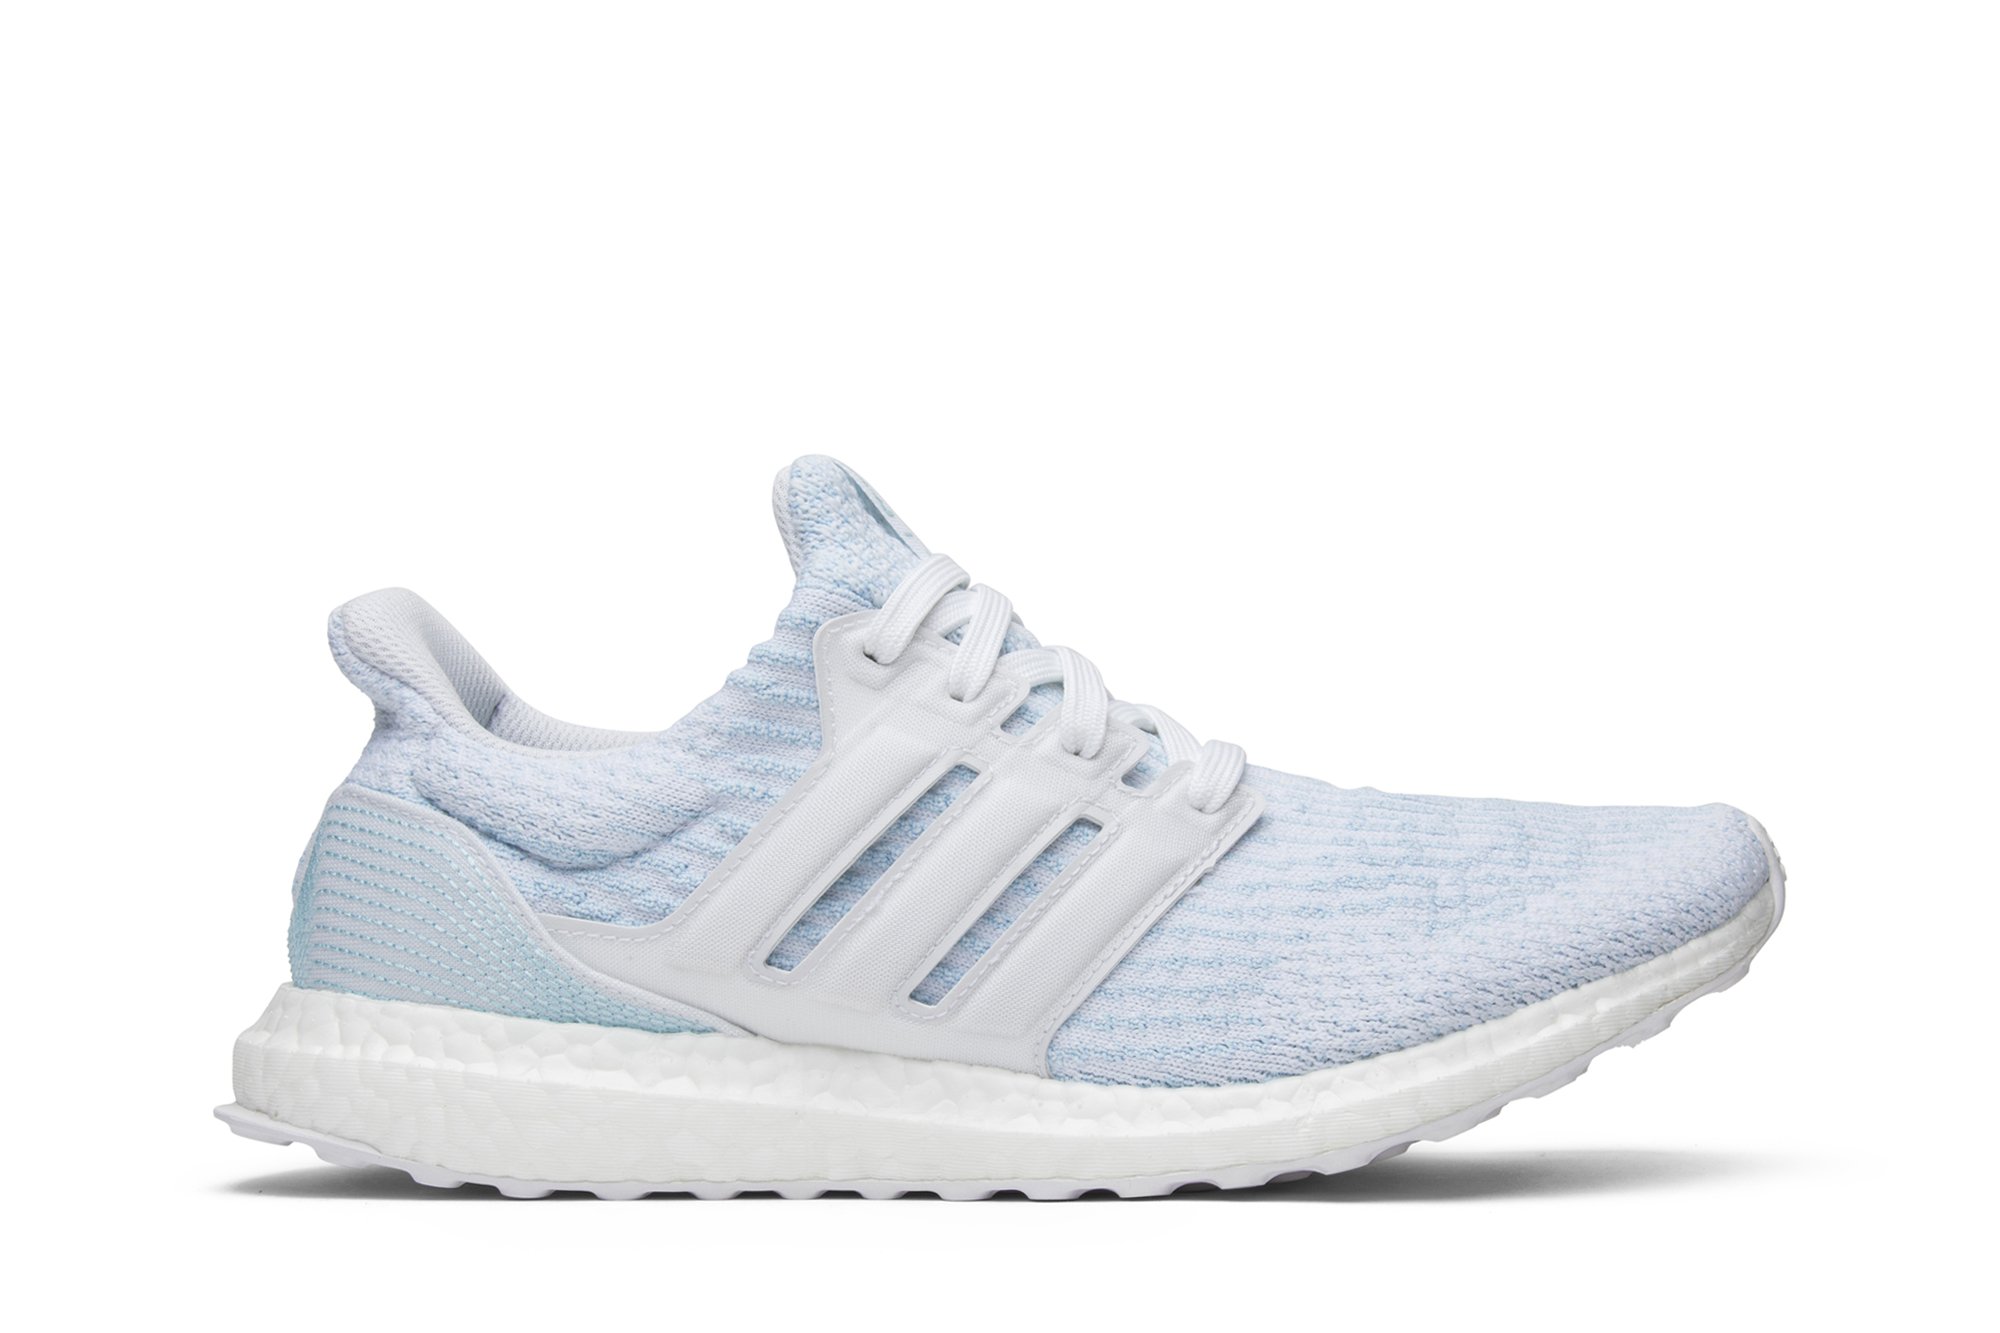 Parley x UltraBoost 3.0 Limited 'Icey Blue'